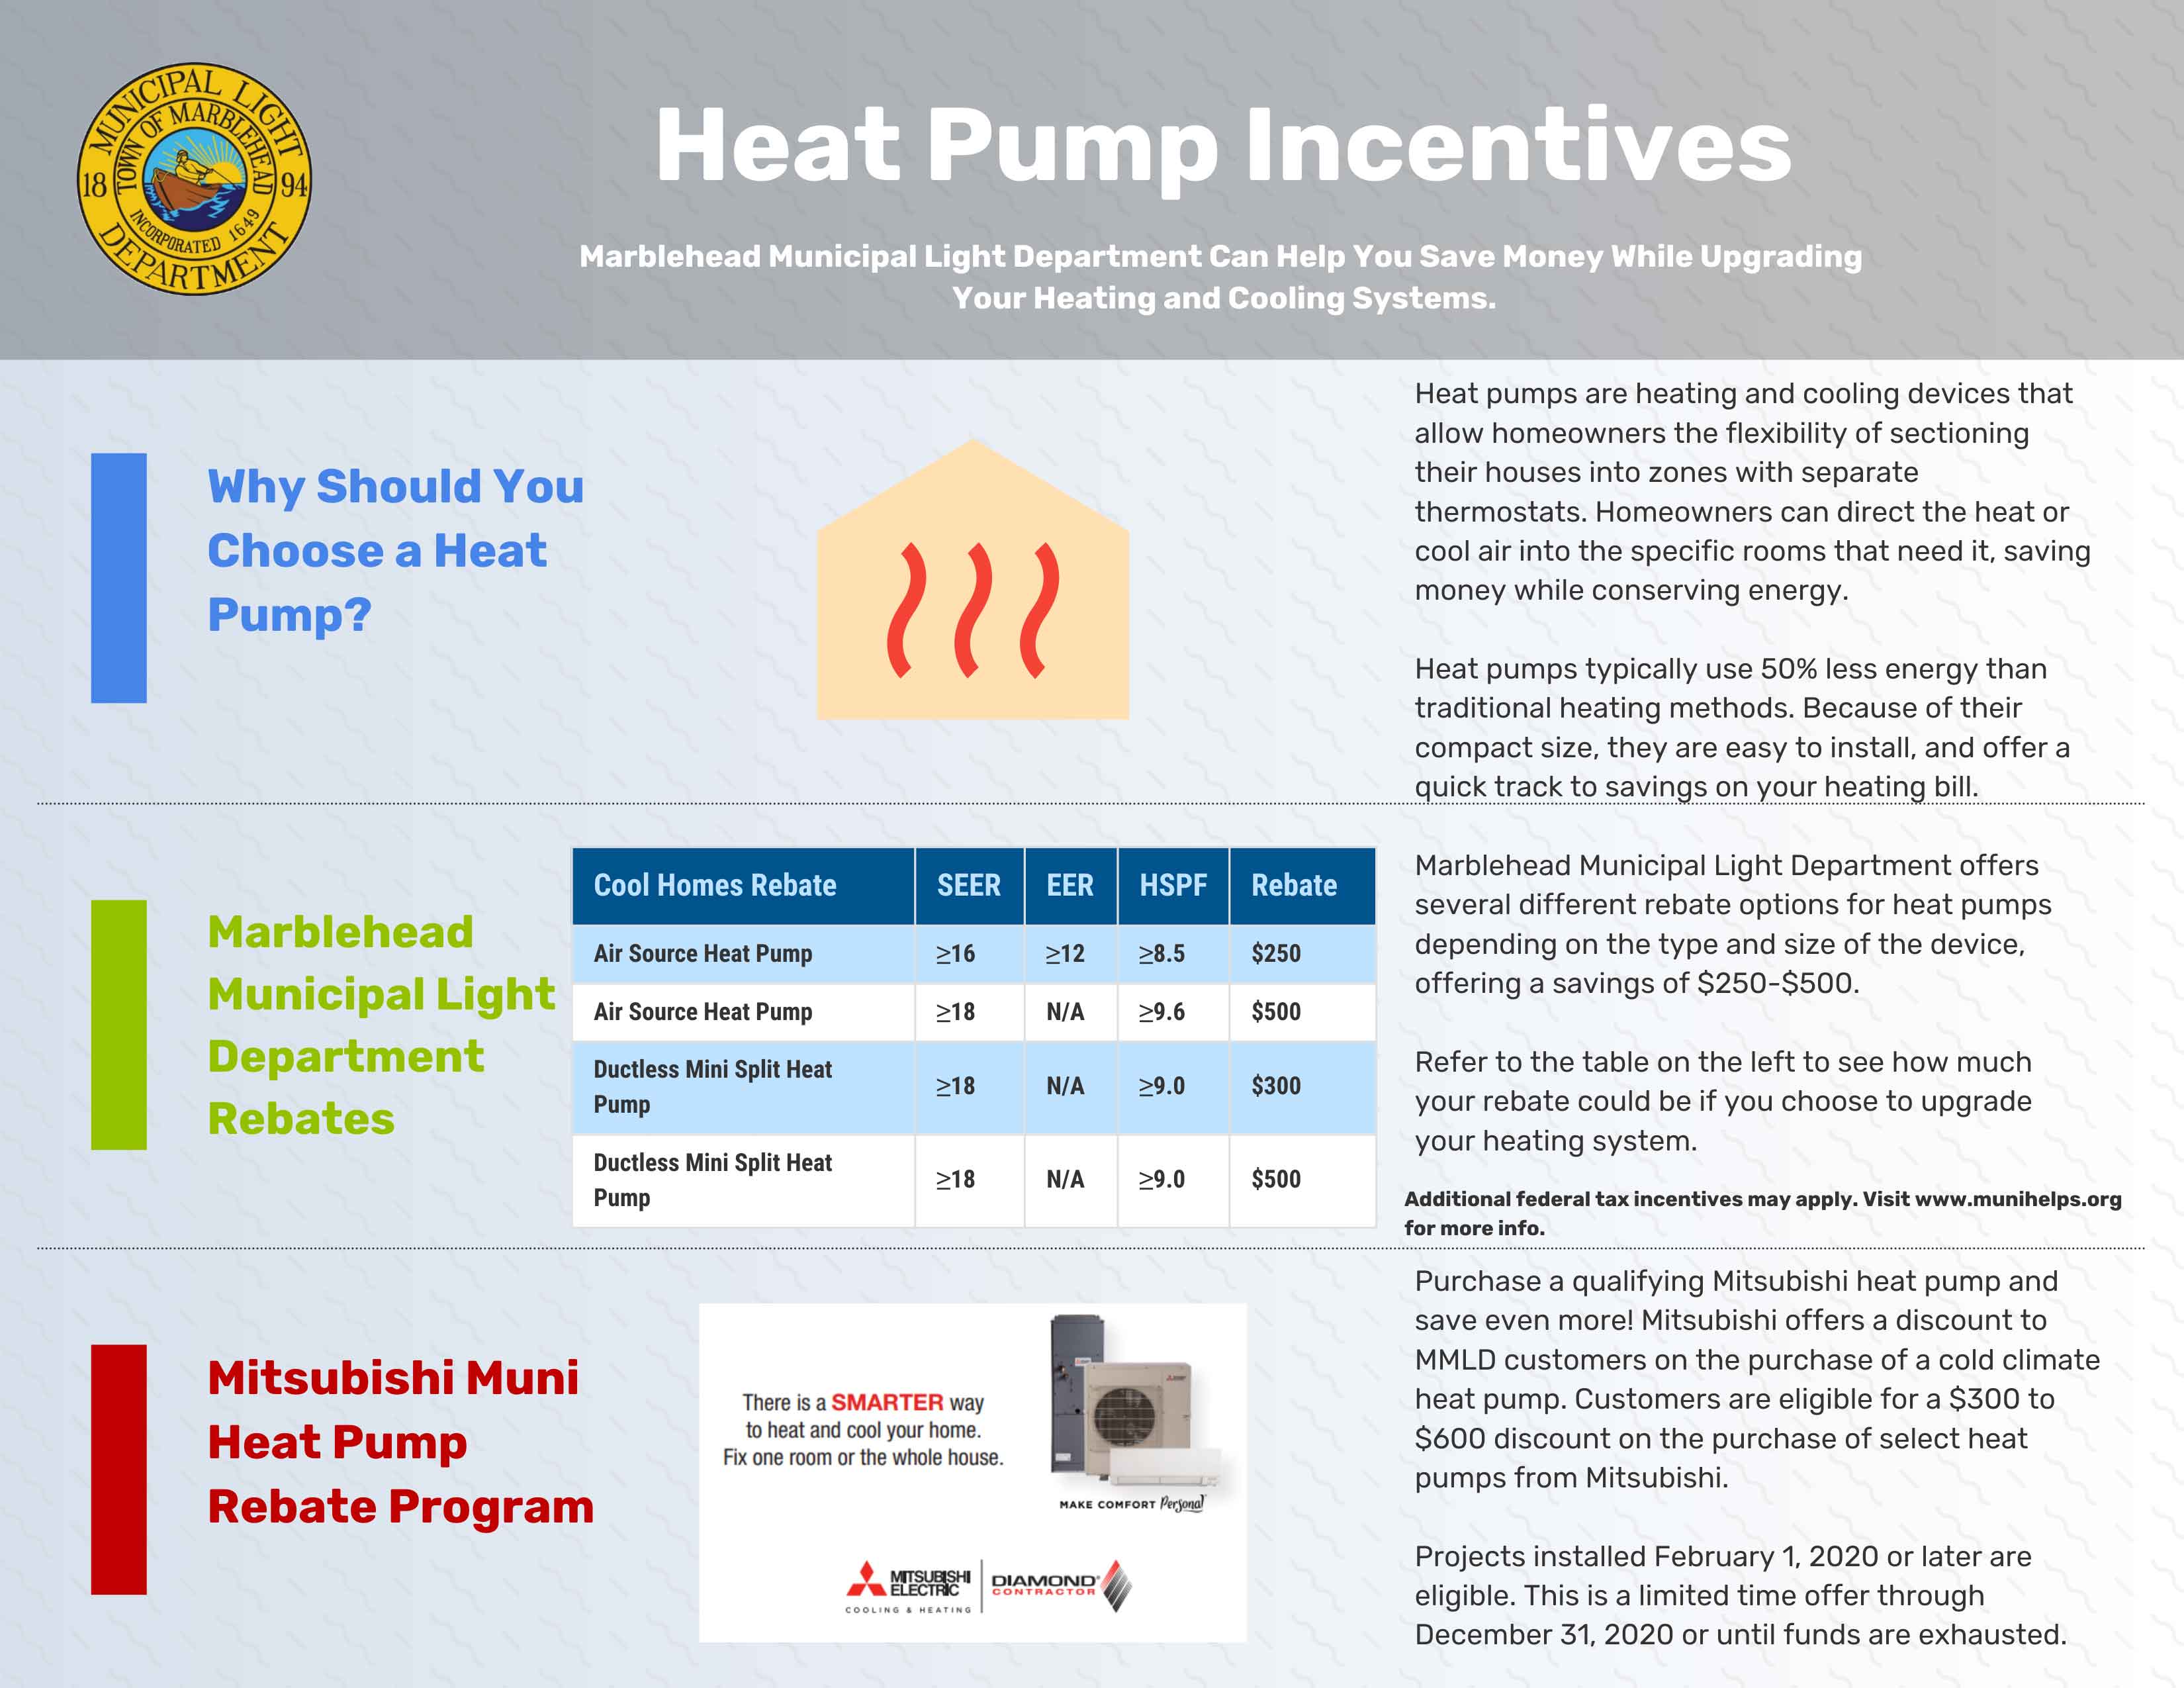 Marblehead Heat Pump Incentives graphic